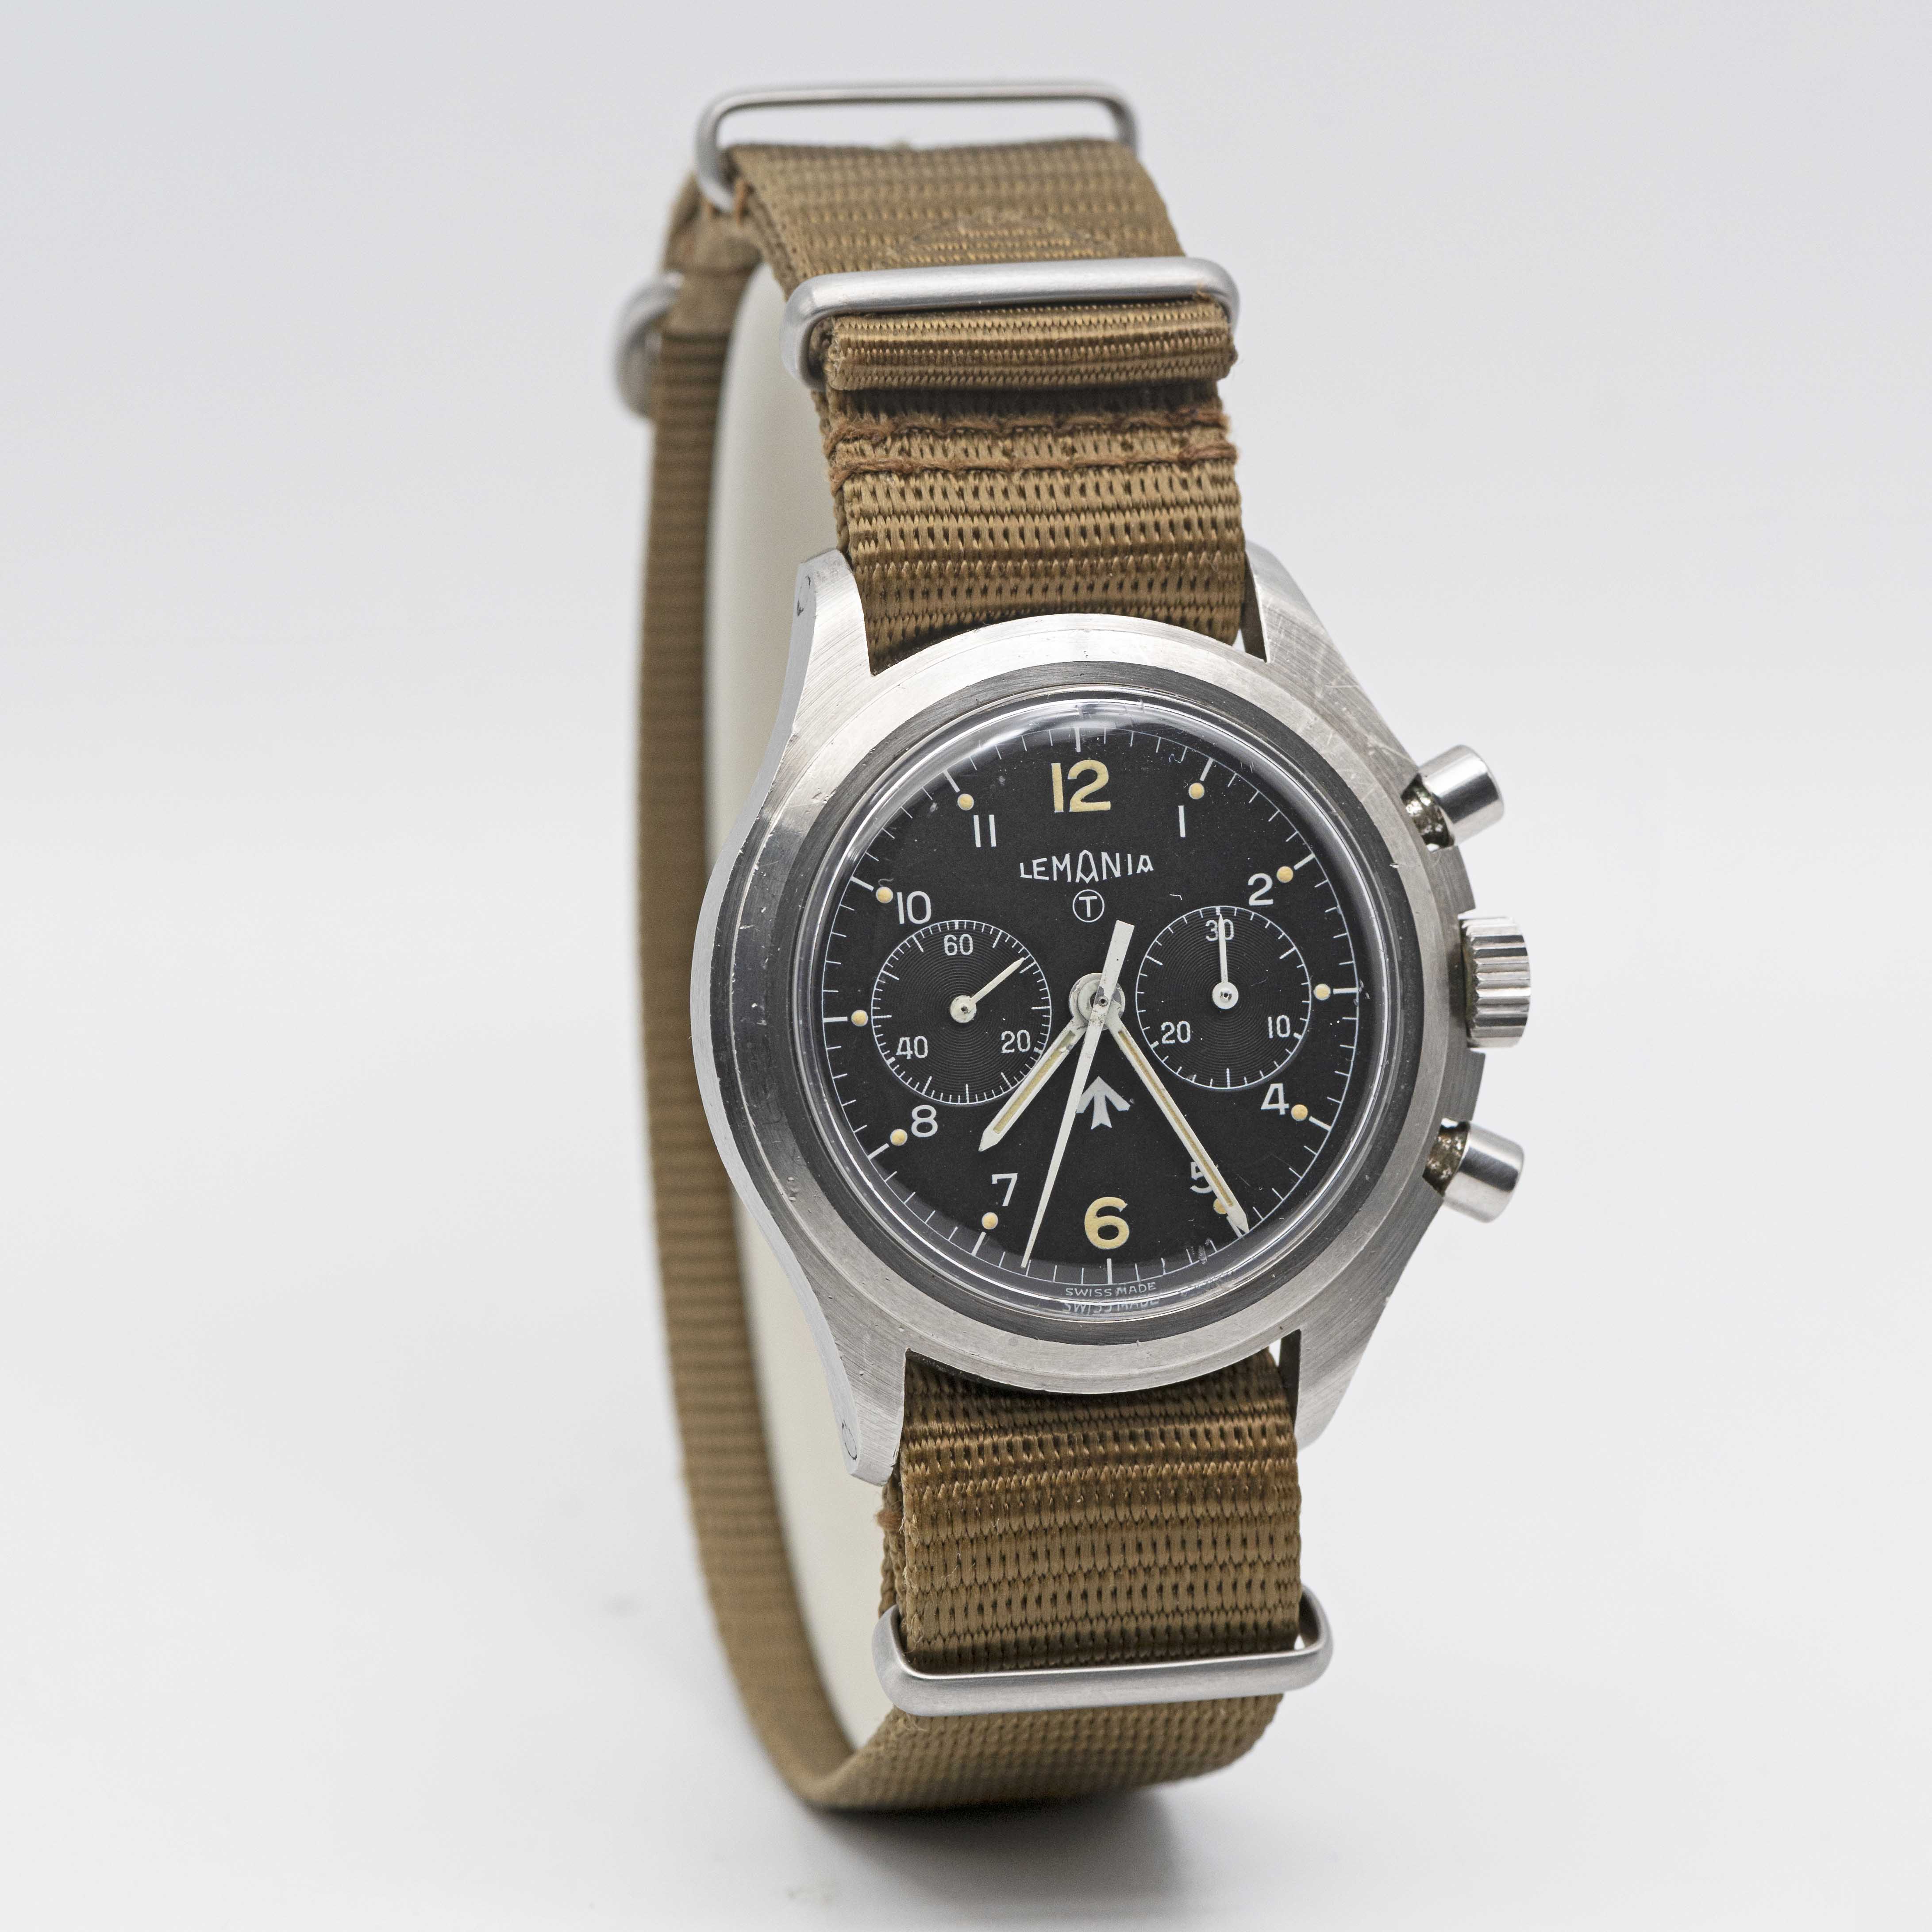 A RARE GENTLEMAN'S STAINLESS STEEL BRITISH MILITARY ROYAL NAVY LEMANIA "DOUBLE BUTTON" CHRONOGRAPH - Image 7 of 11